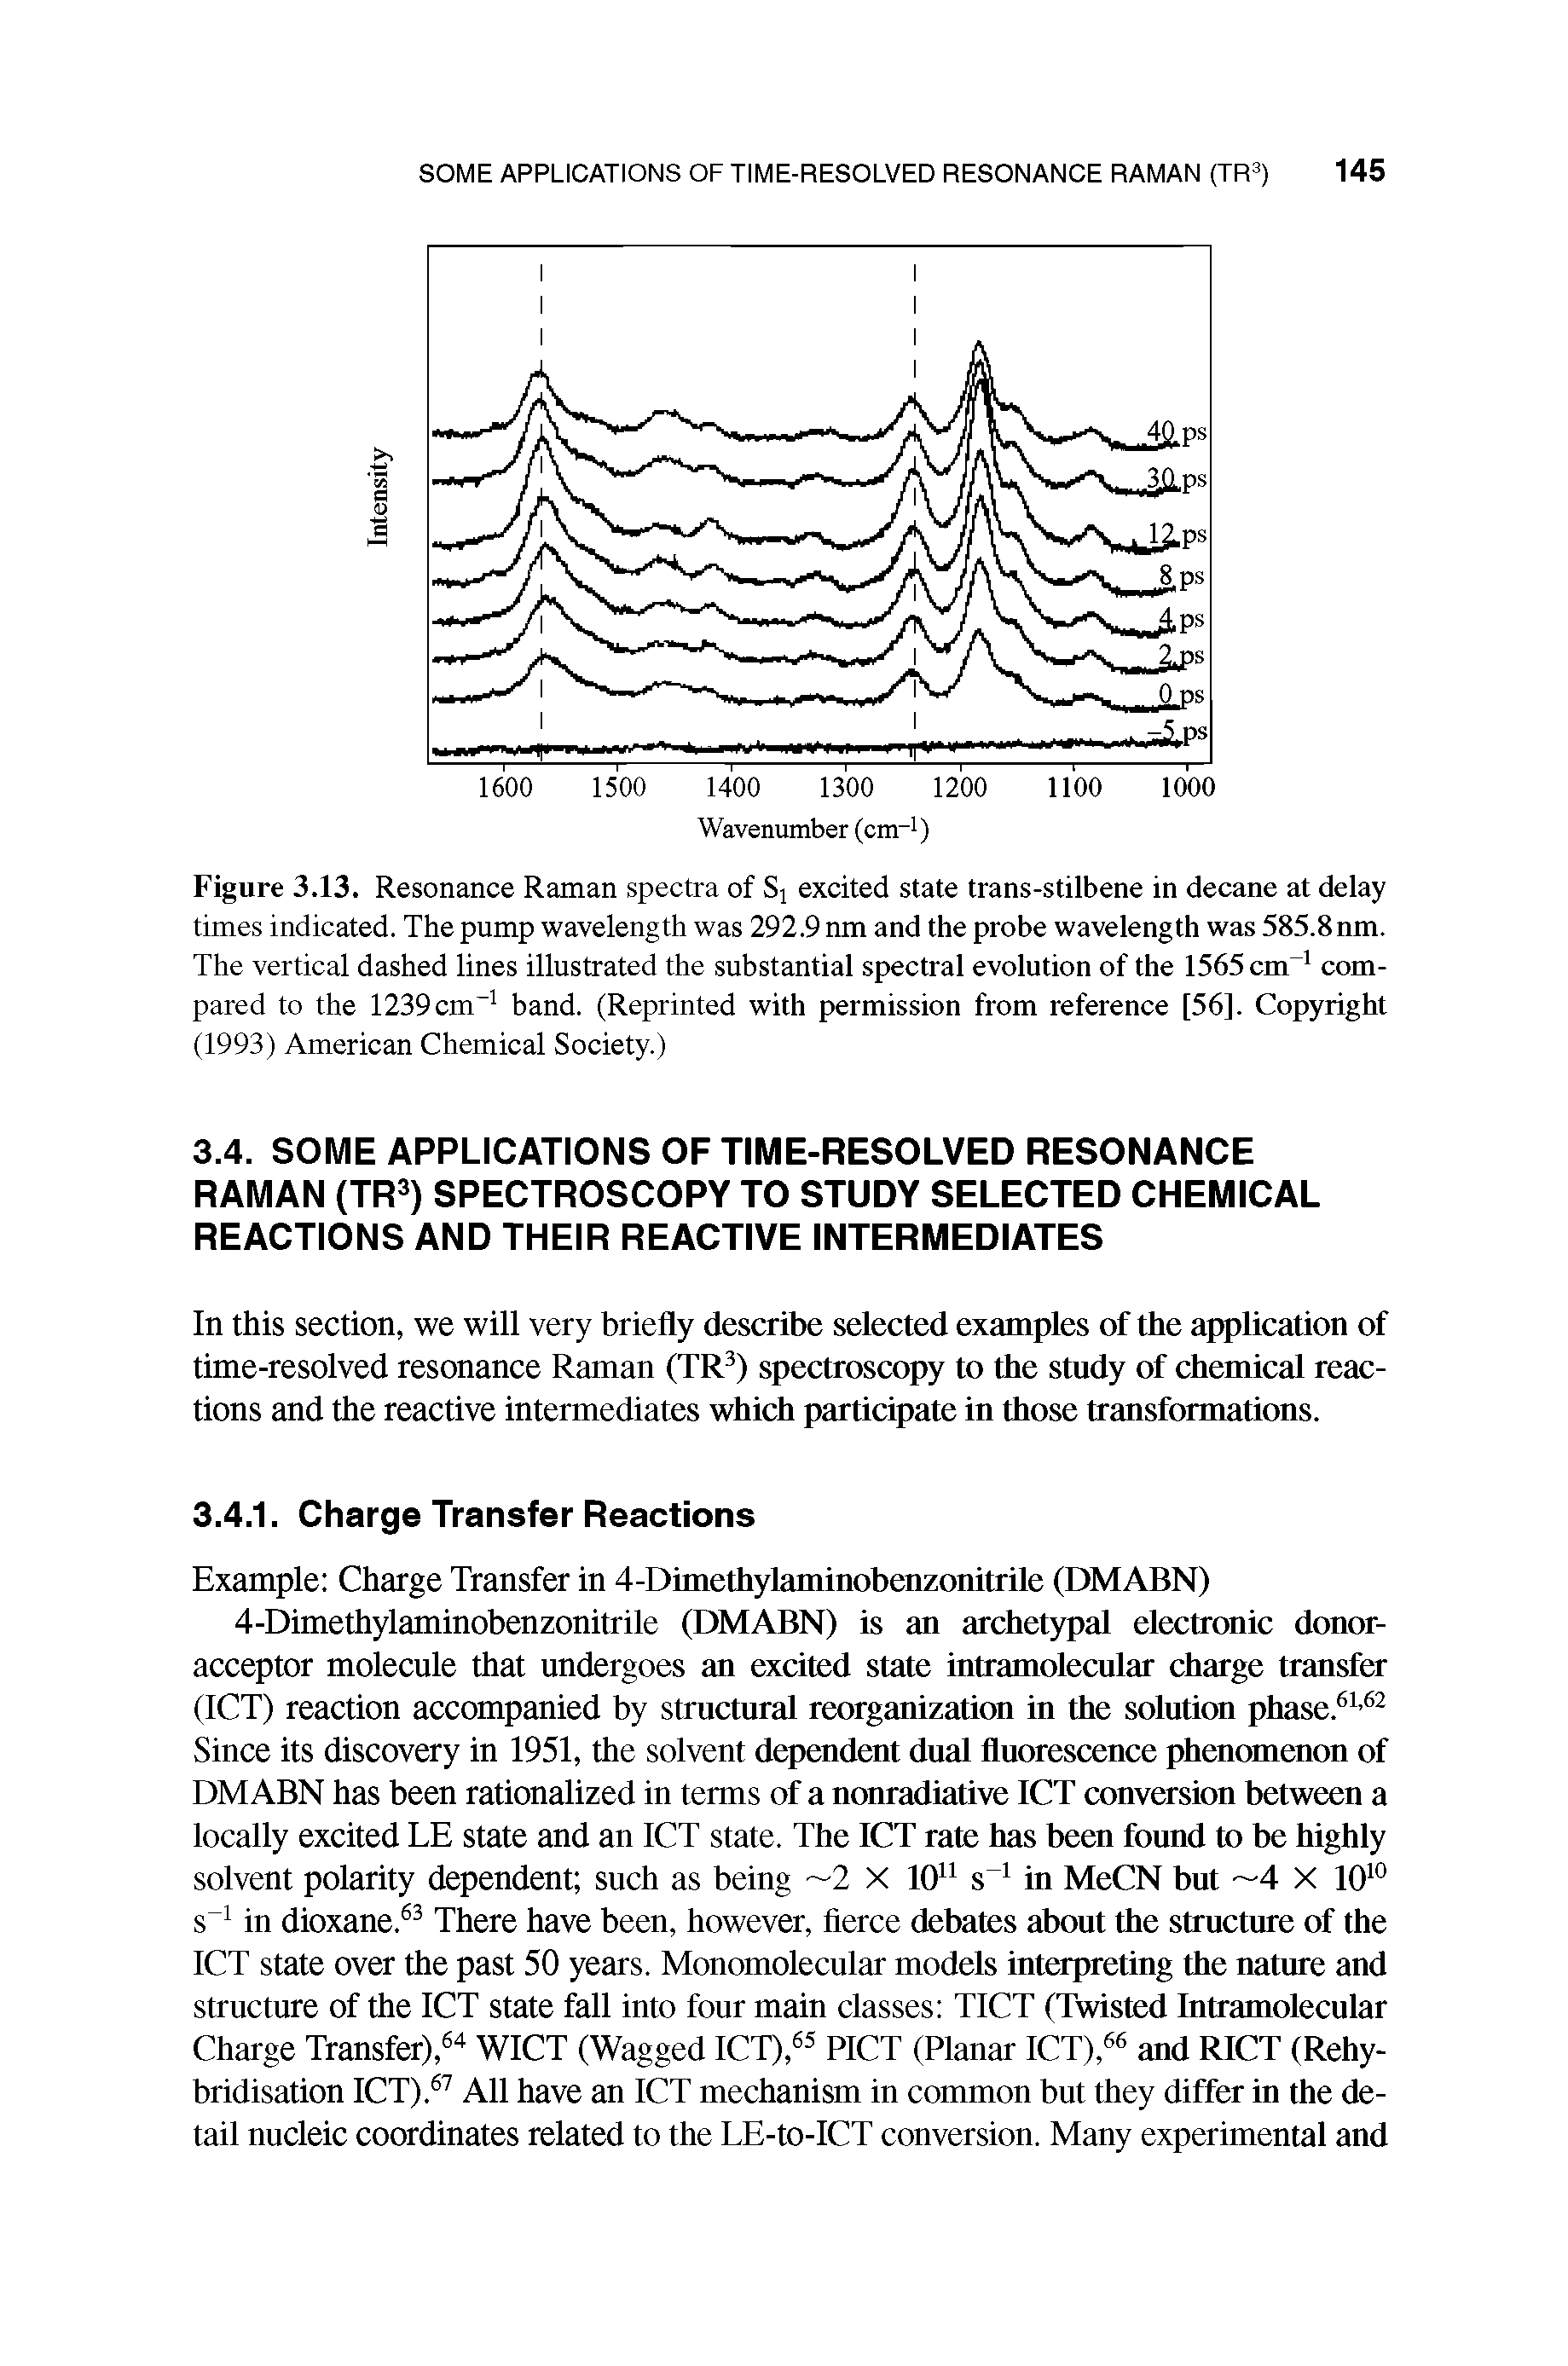 Figure 3.13. Resonance Raman spectra of Sj excited state trans-stilbene in decane at delay times indicated. The pump wavelength was 292.9 nm and the probe wavelength was 585.8nm. The vertical dashed lines illustrated the substantial spectral evolution of the 1565 cm compared to the 1239cm band. (Reprinted with permission from reference [56]. Copyright (1993) American Chemical Society.)...